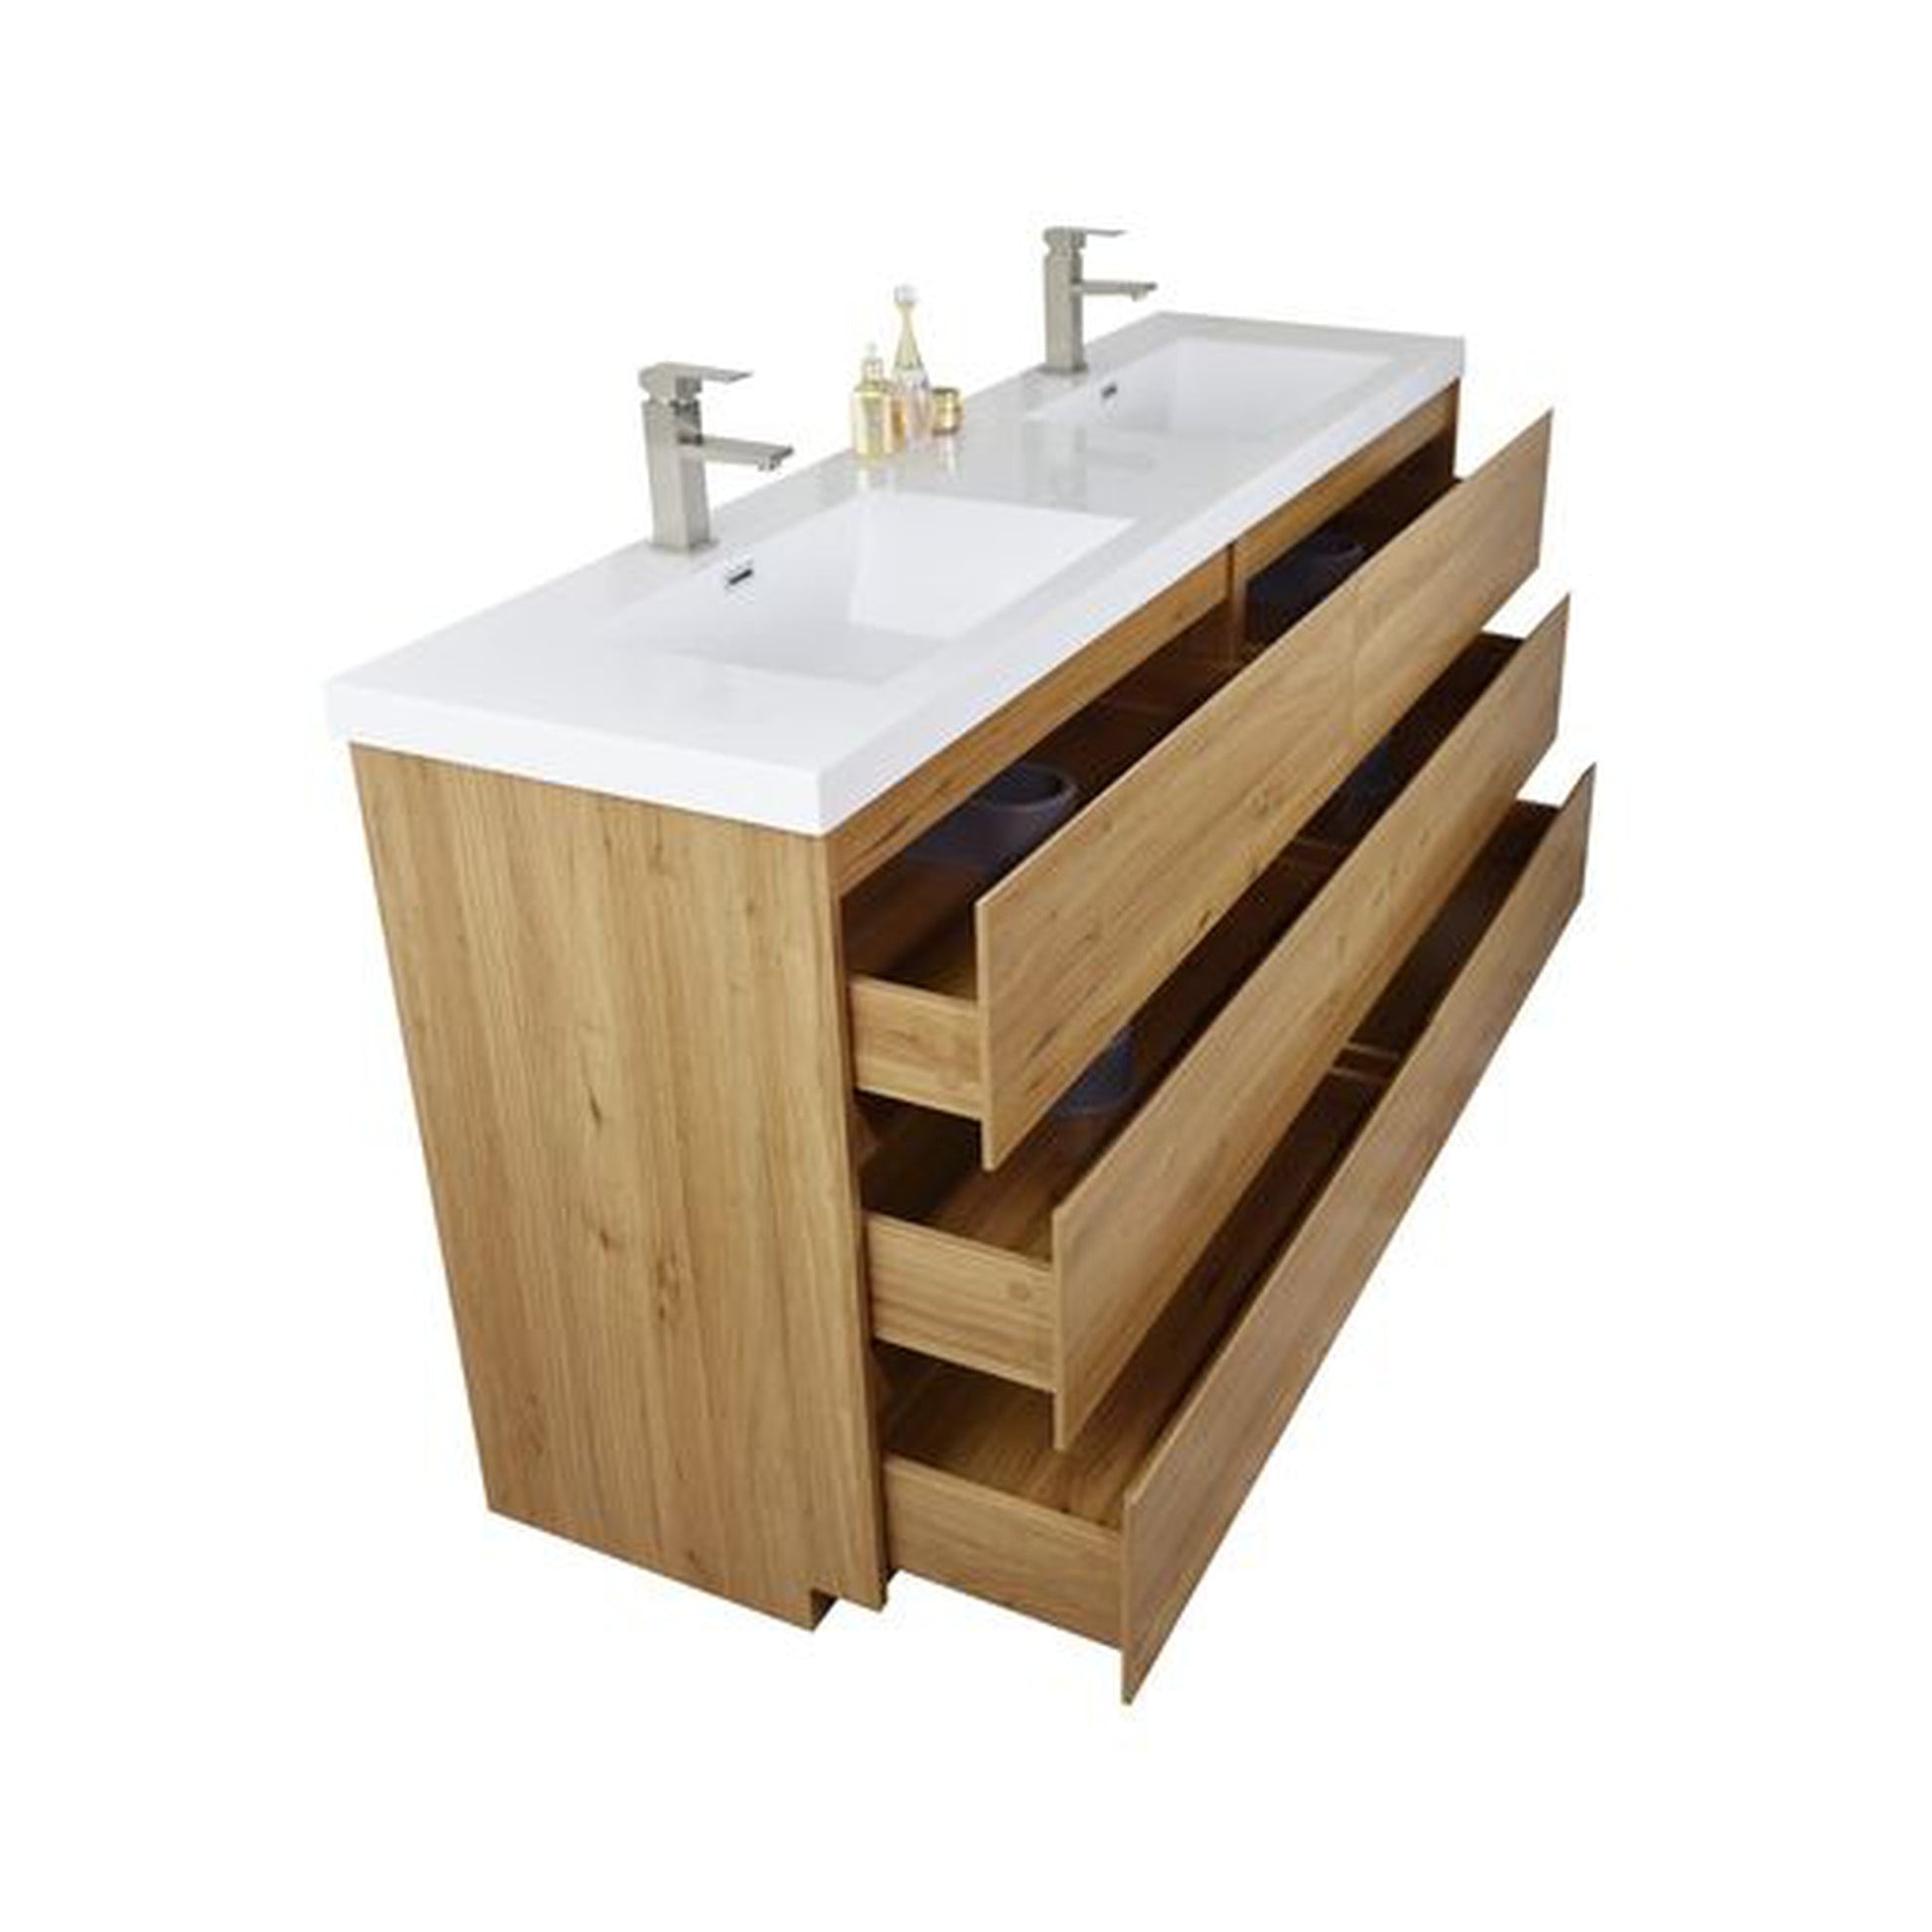 Moreno Bath Angeles 72" Nature Oak Freestanding Vanity With Double Reinforced White Acrylic Sinks